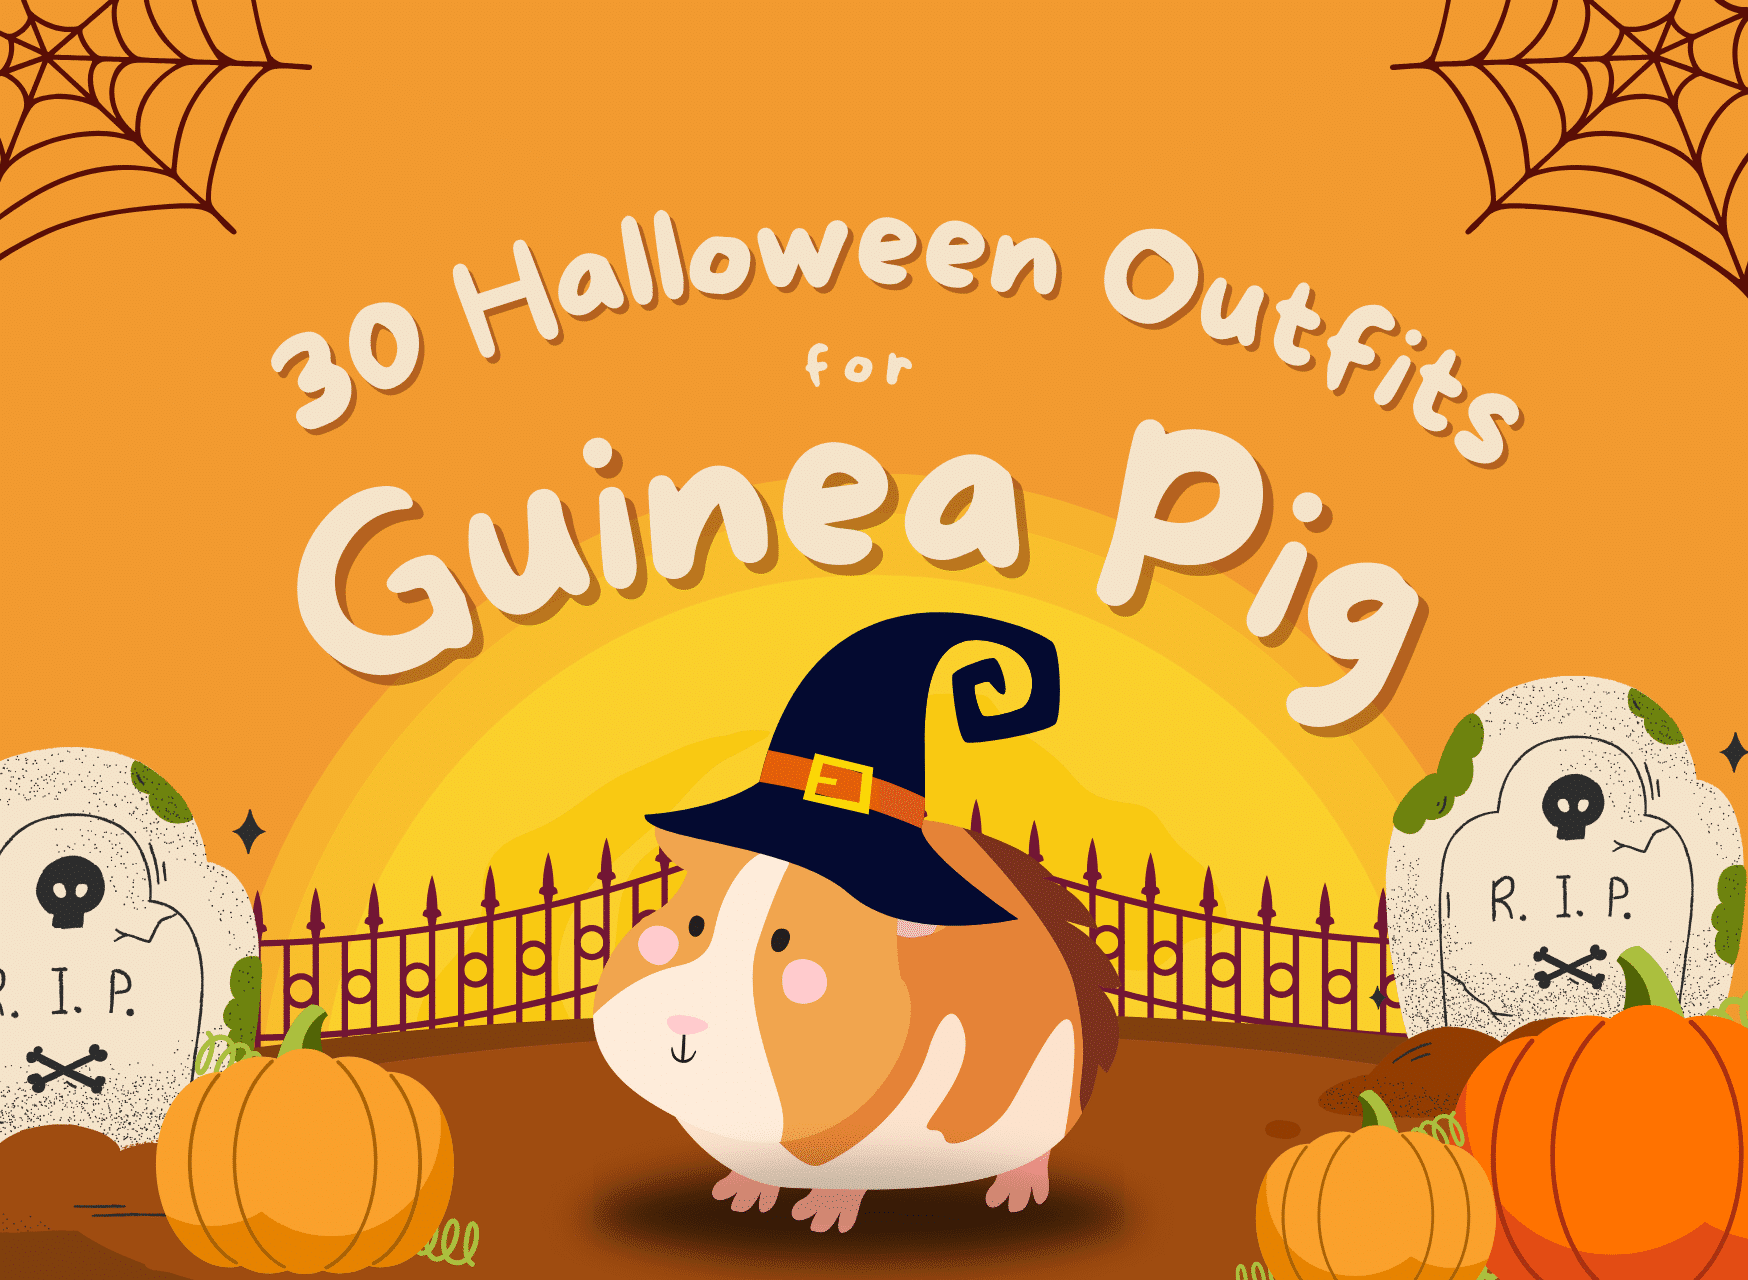 The Best 30 Halloween Outfits for Guinea Pigs